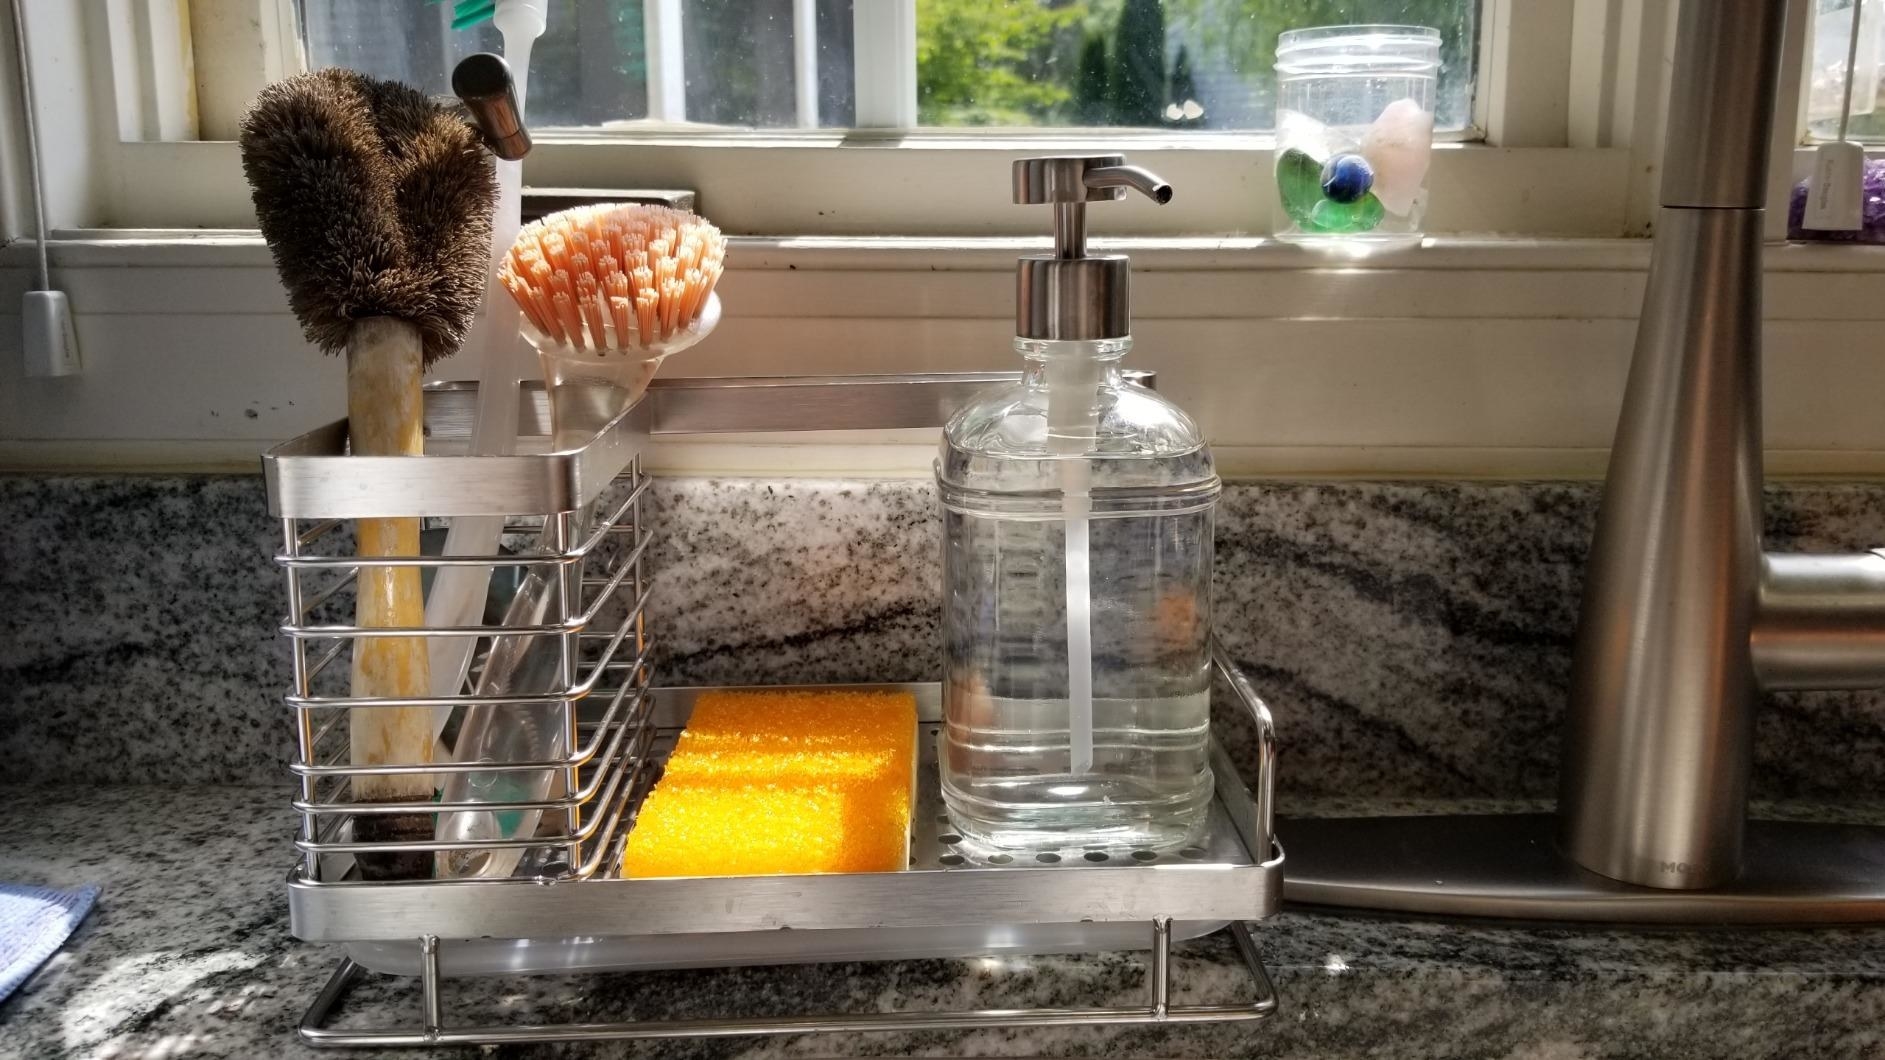 reviewer image of the odesign kitchen sink caddy organizer in a kitchen